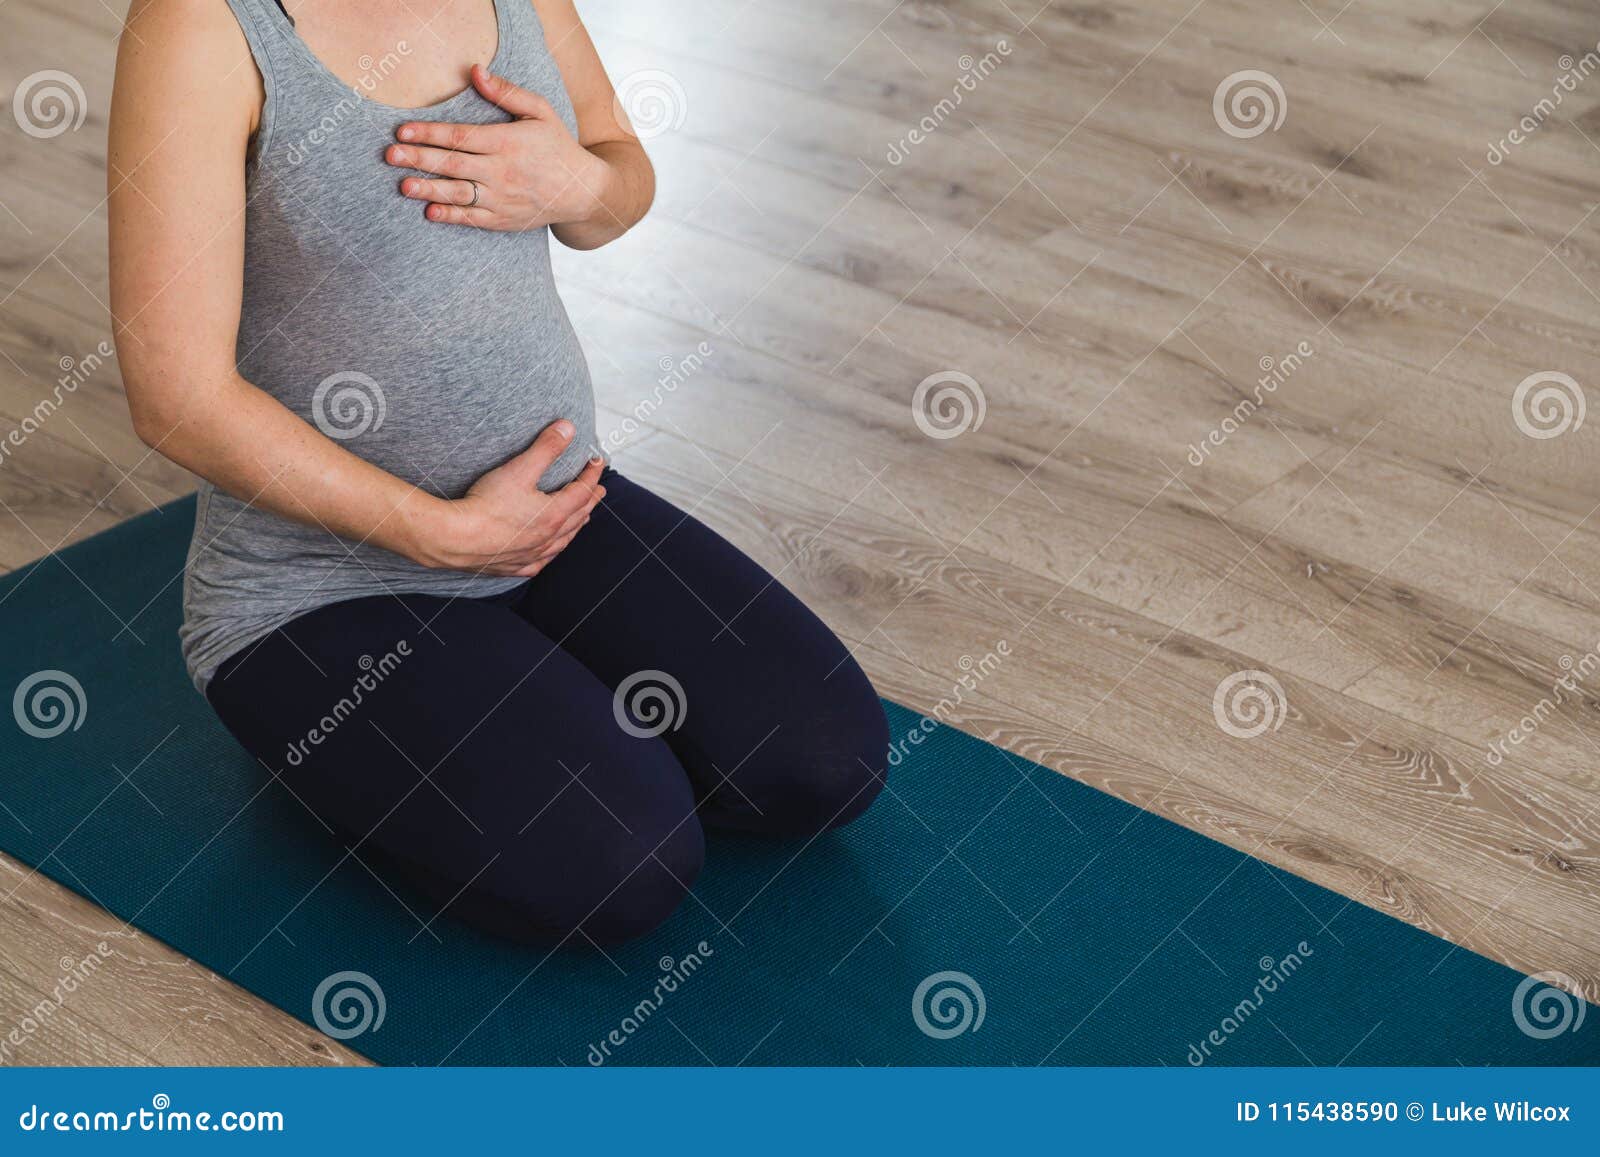 young pregnant woman sat on mat doing prenatal yoga holding belly